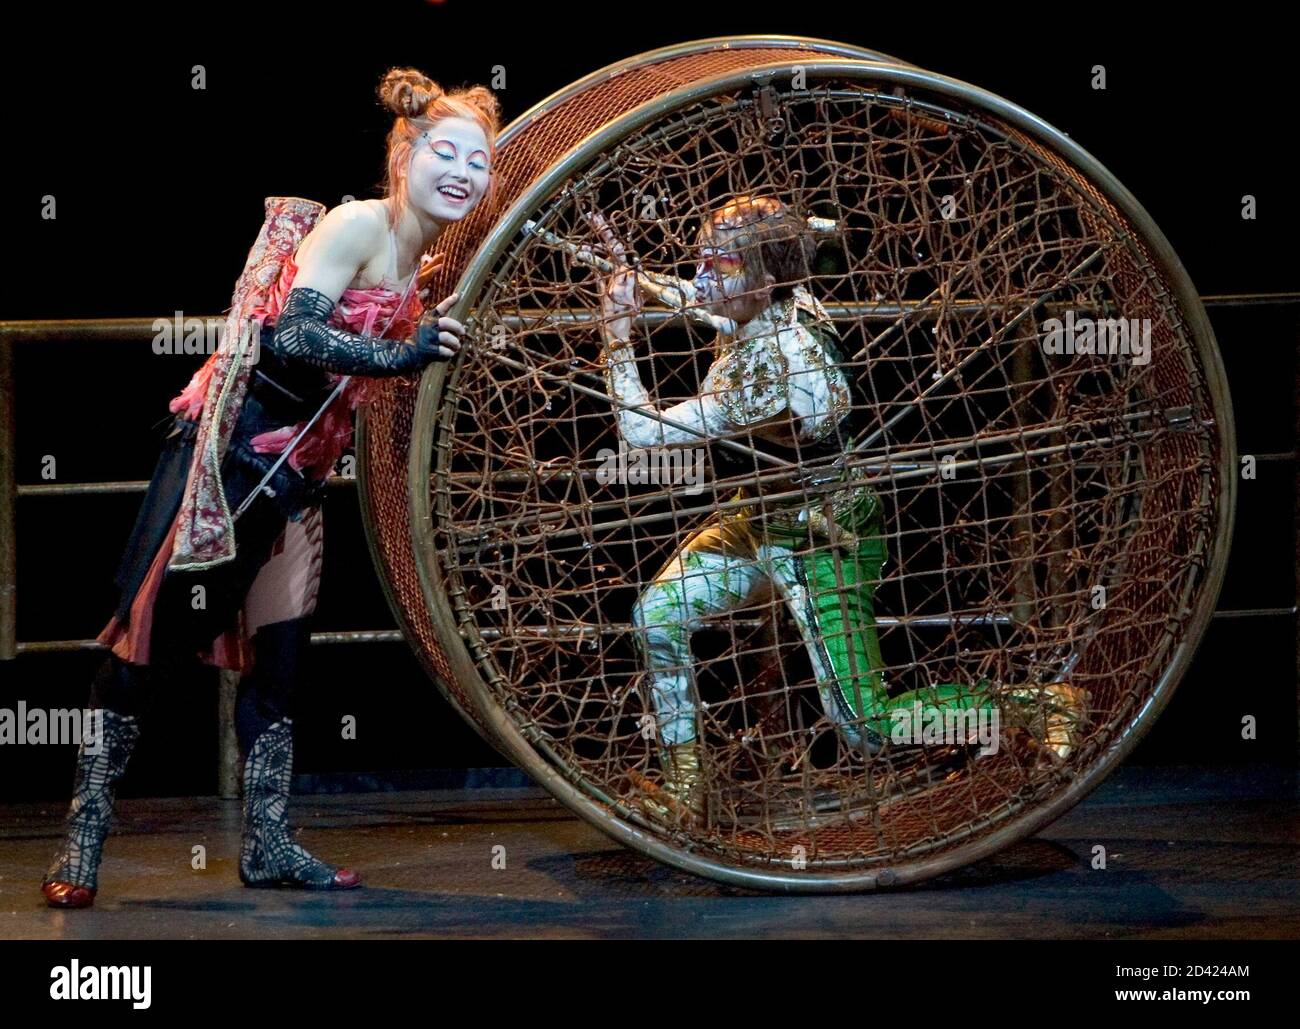 Noriko Takahashi and Cheri Tabushi Haight perform in a scene from Cirque du  Soleil's "Ka" at the MGM Grand in Las Vegas. Noriko Takahashi (L) and Cheri  Tabushi Haight perform in a